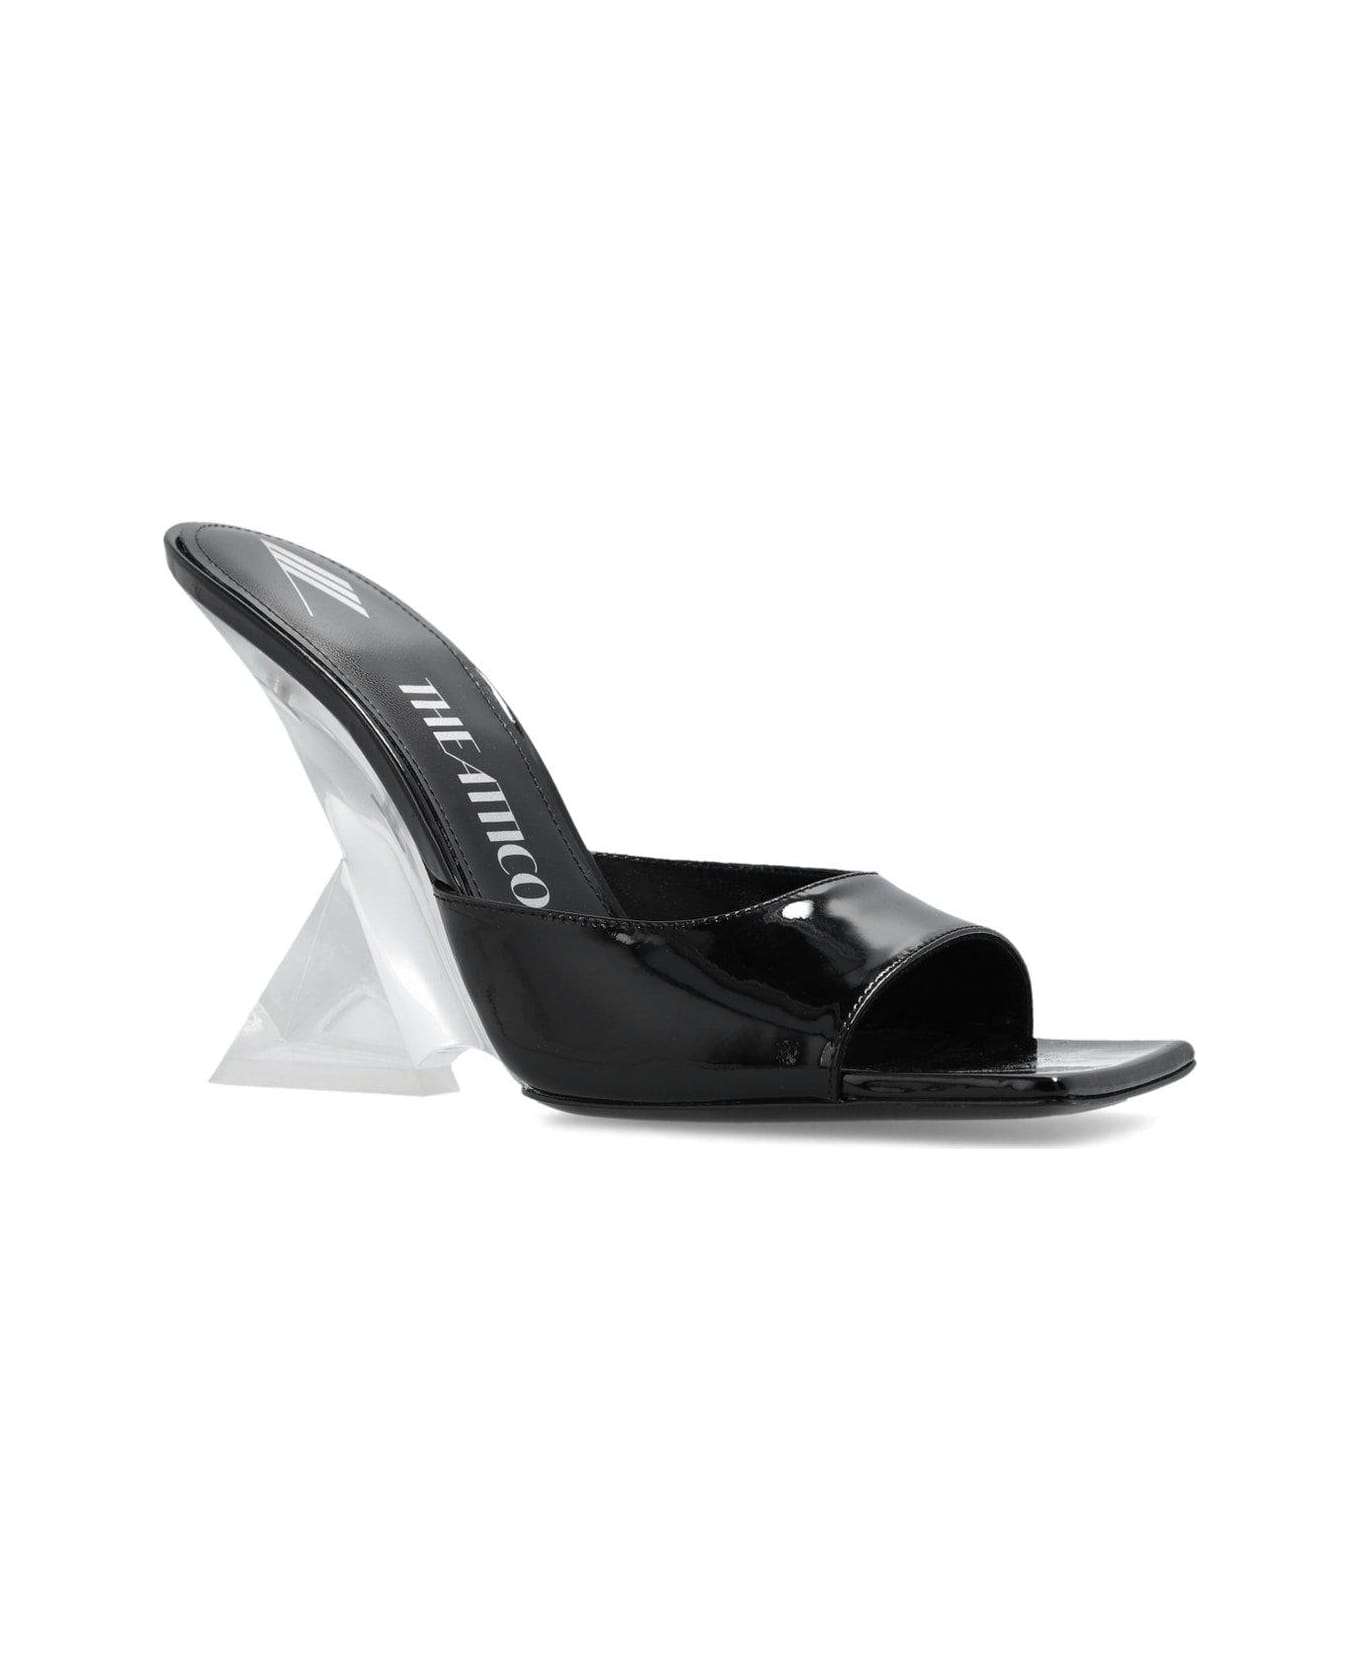 The Attico Cheope Glossy Wedge Square-toe Mules